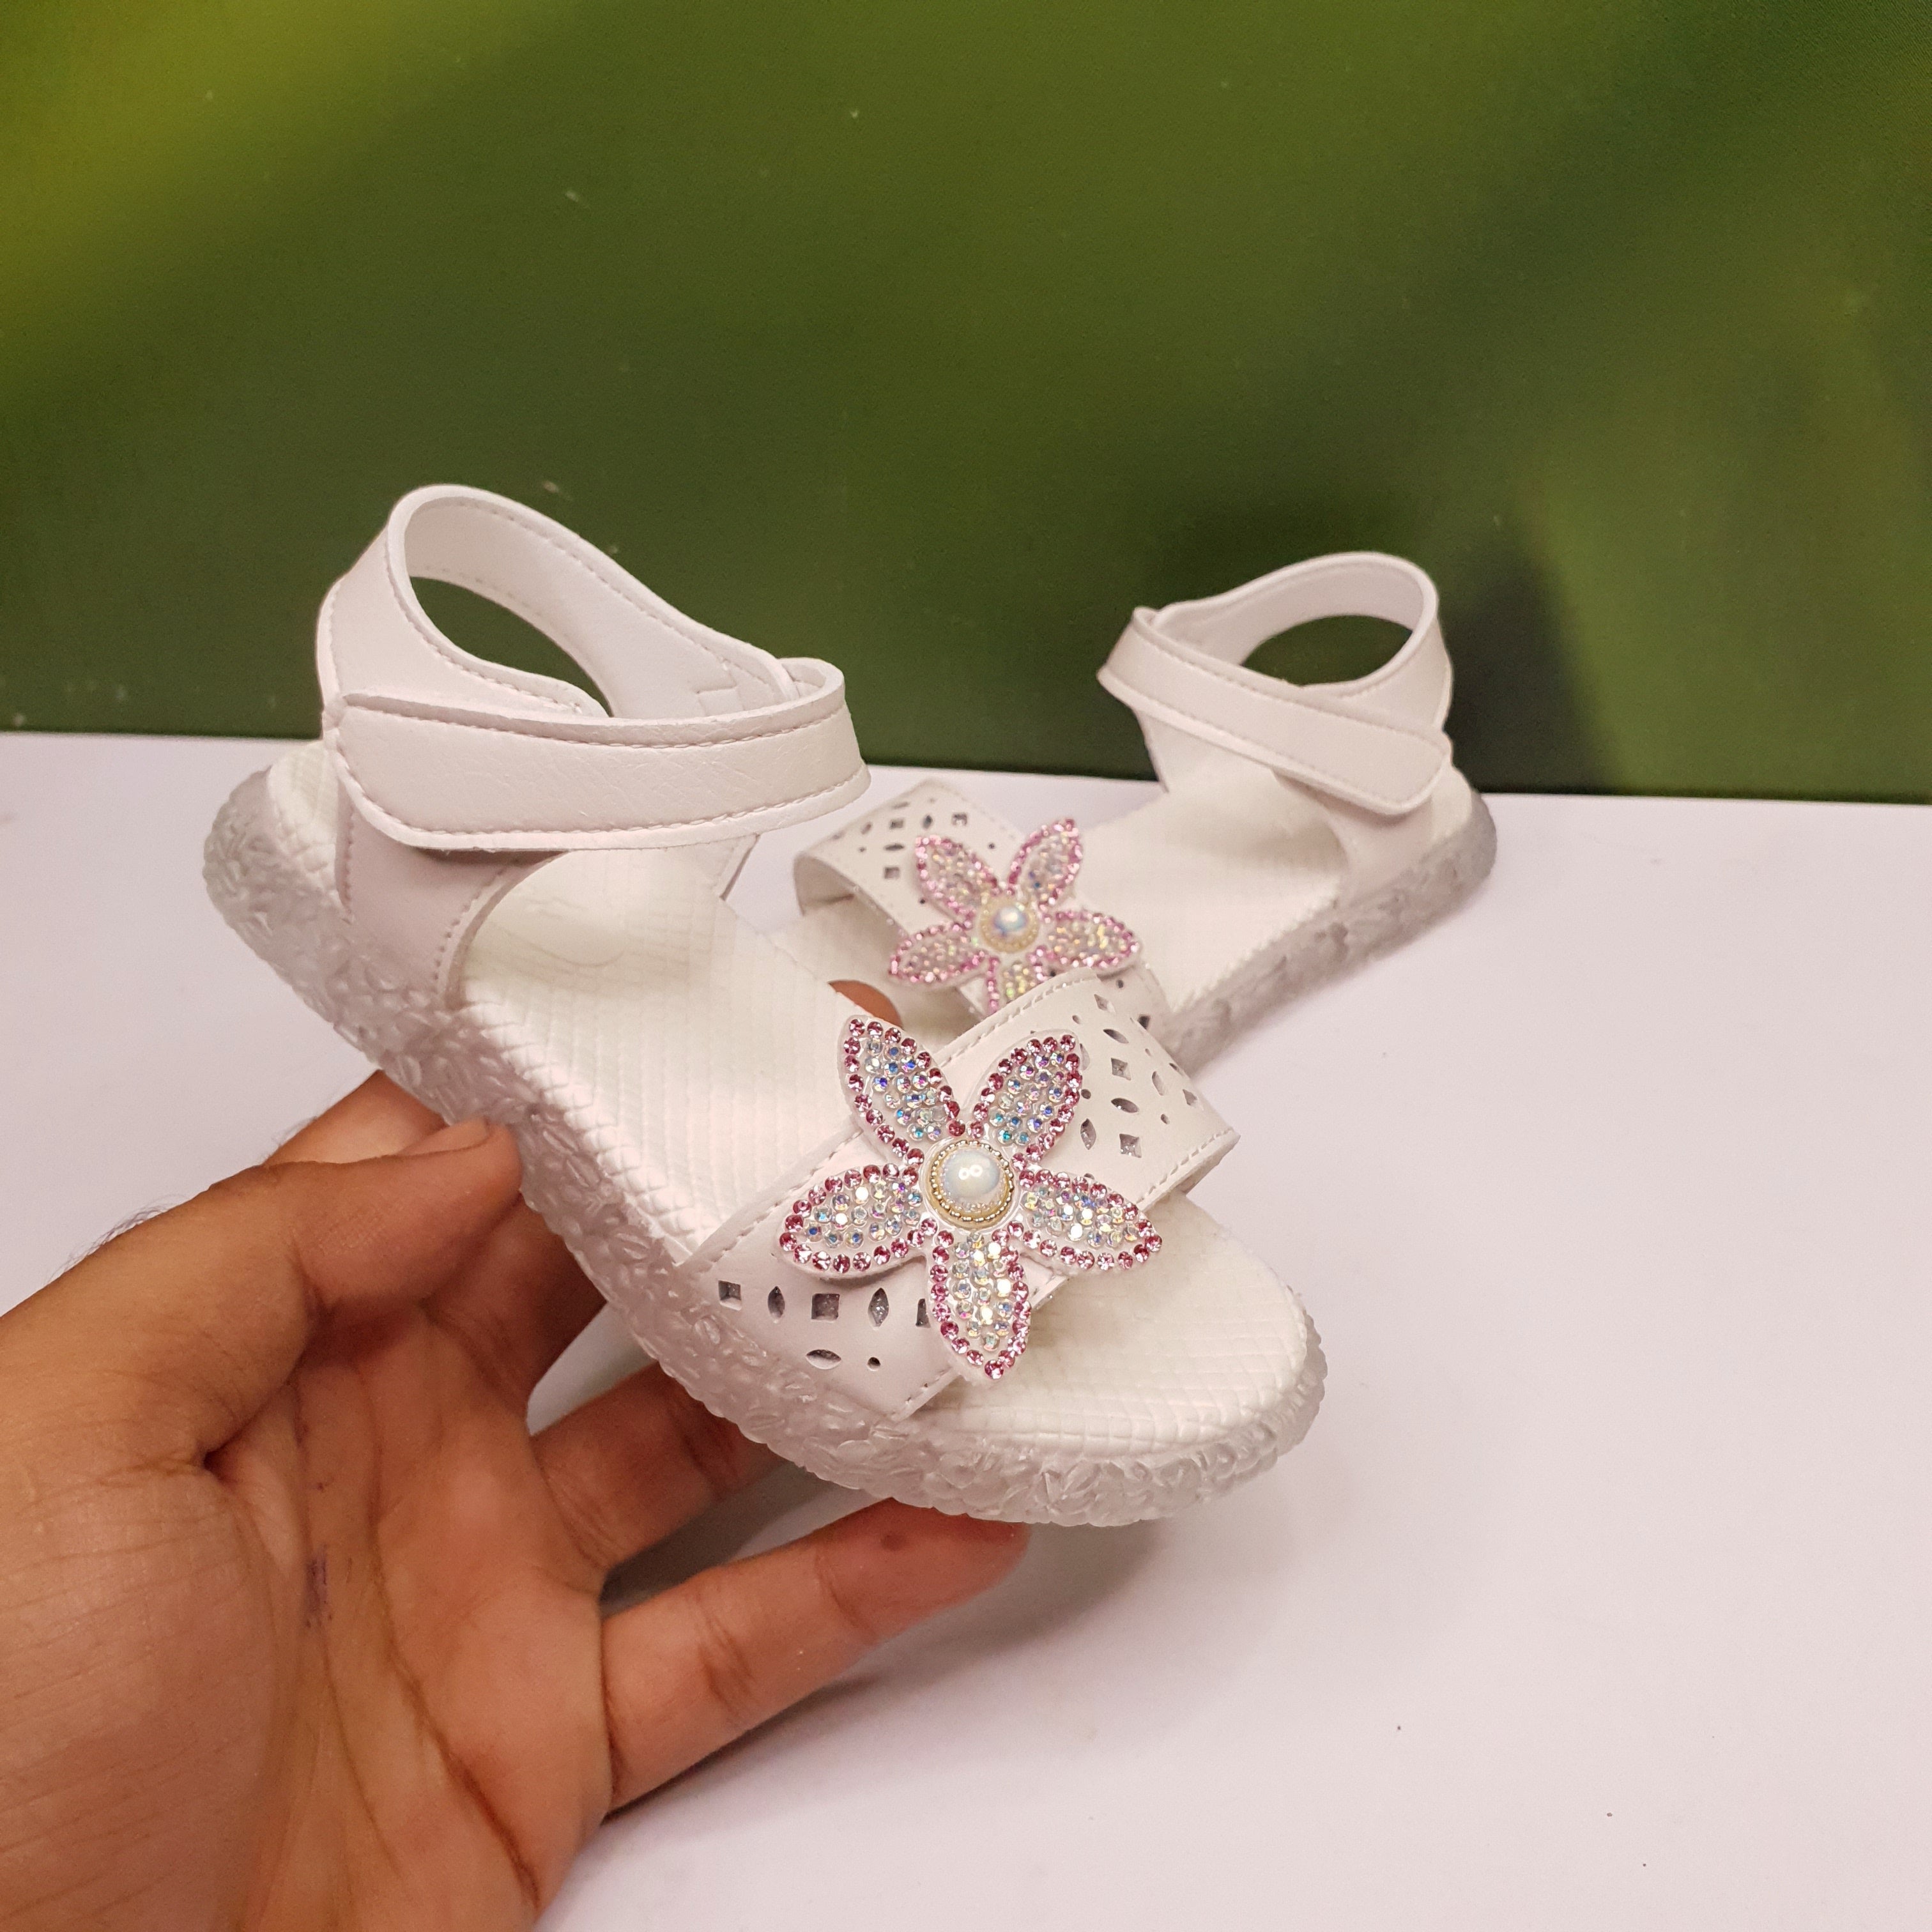 Kids Sandals with Studs Floral Details - Maha fashions -  Kid Footwear